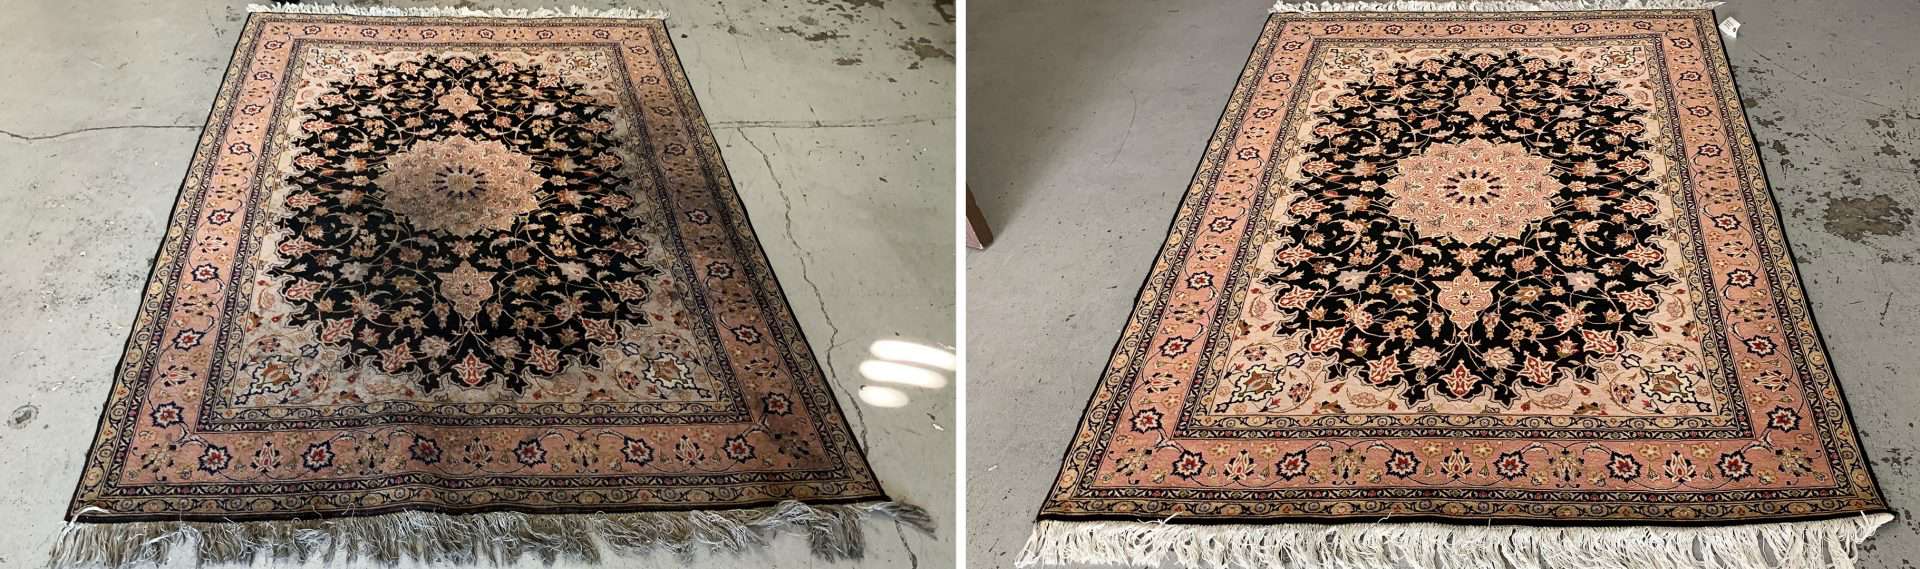 Persian Rug Cleaning Los Angeles, Persian Rug Cleaning Baton Rouge